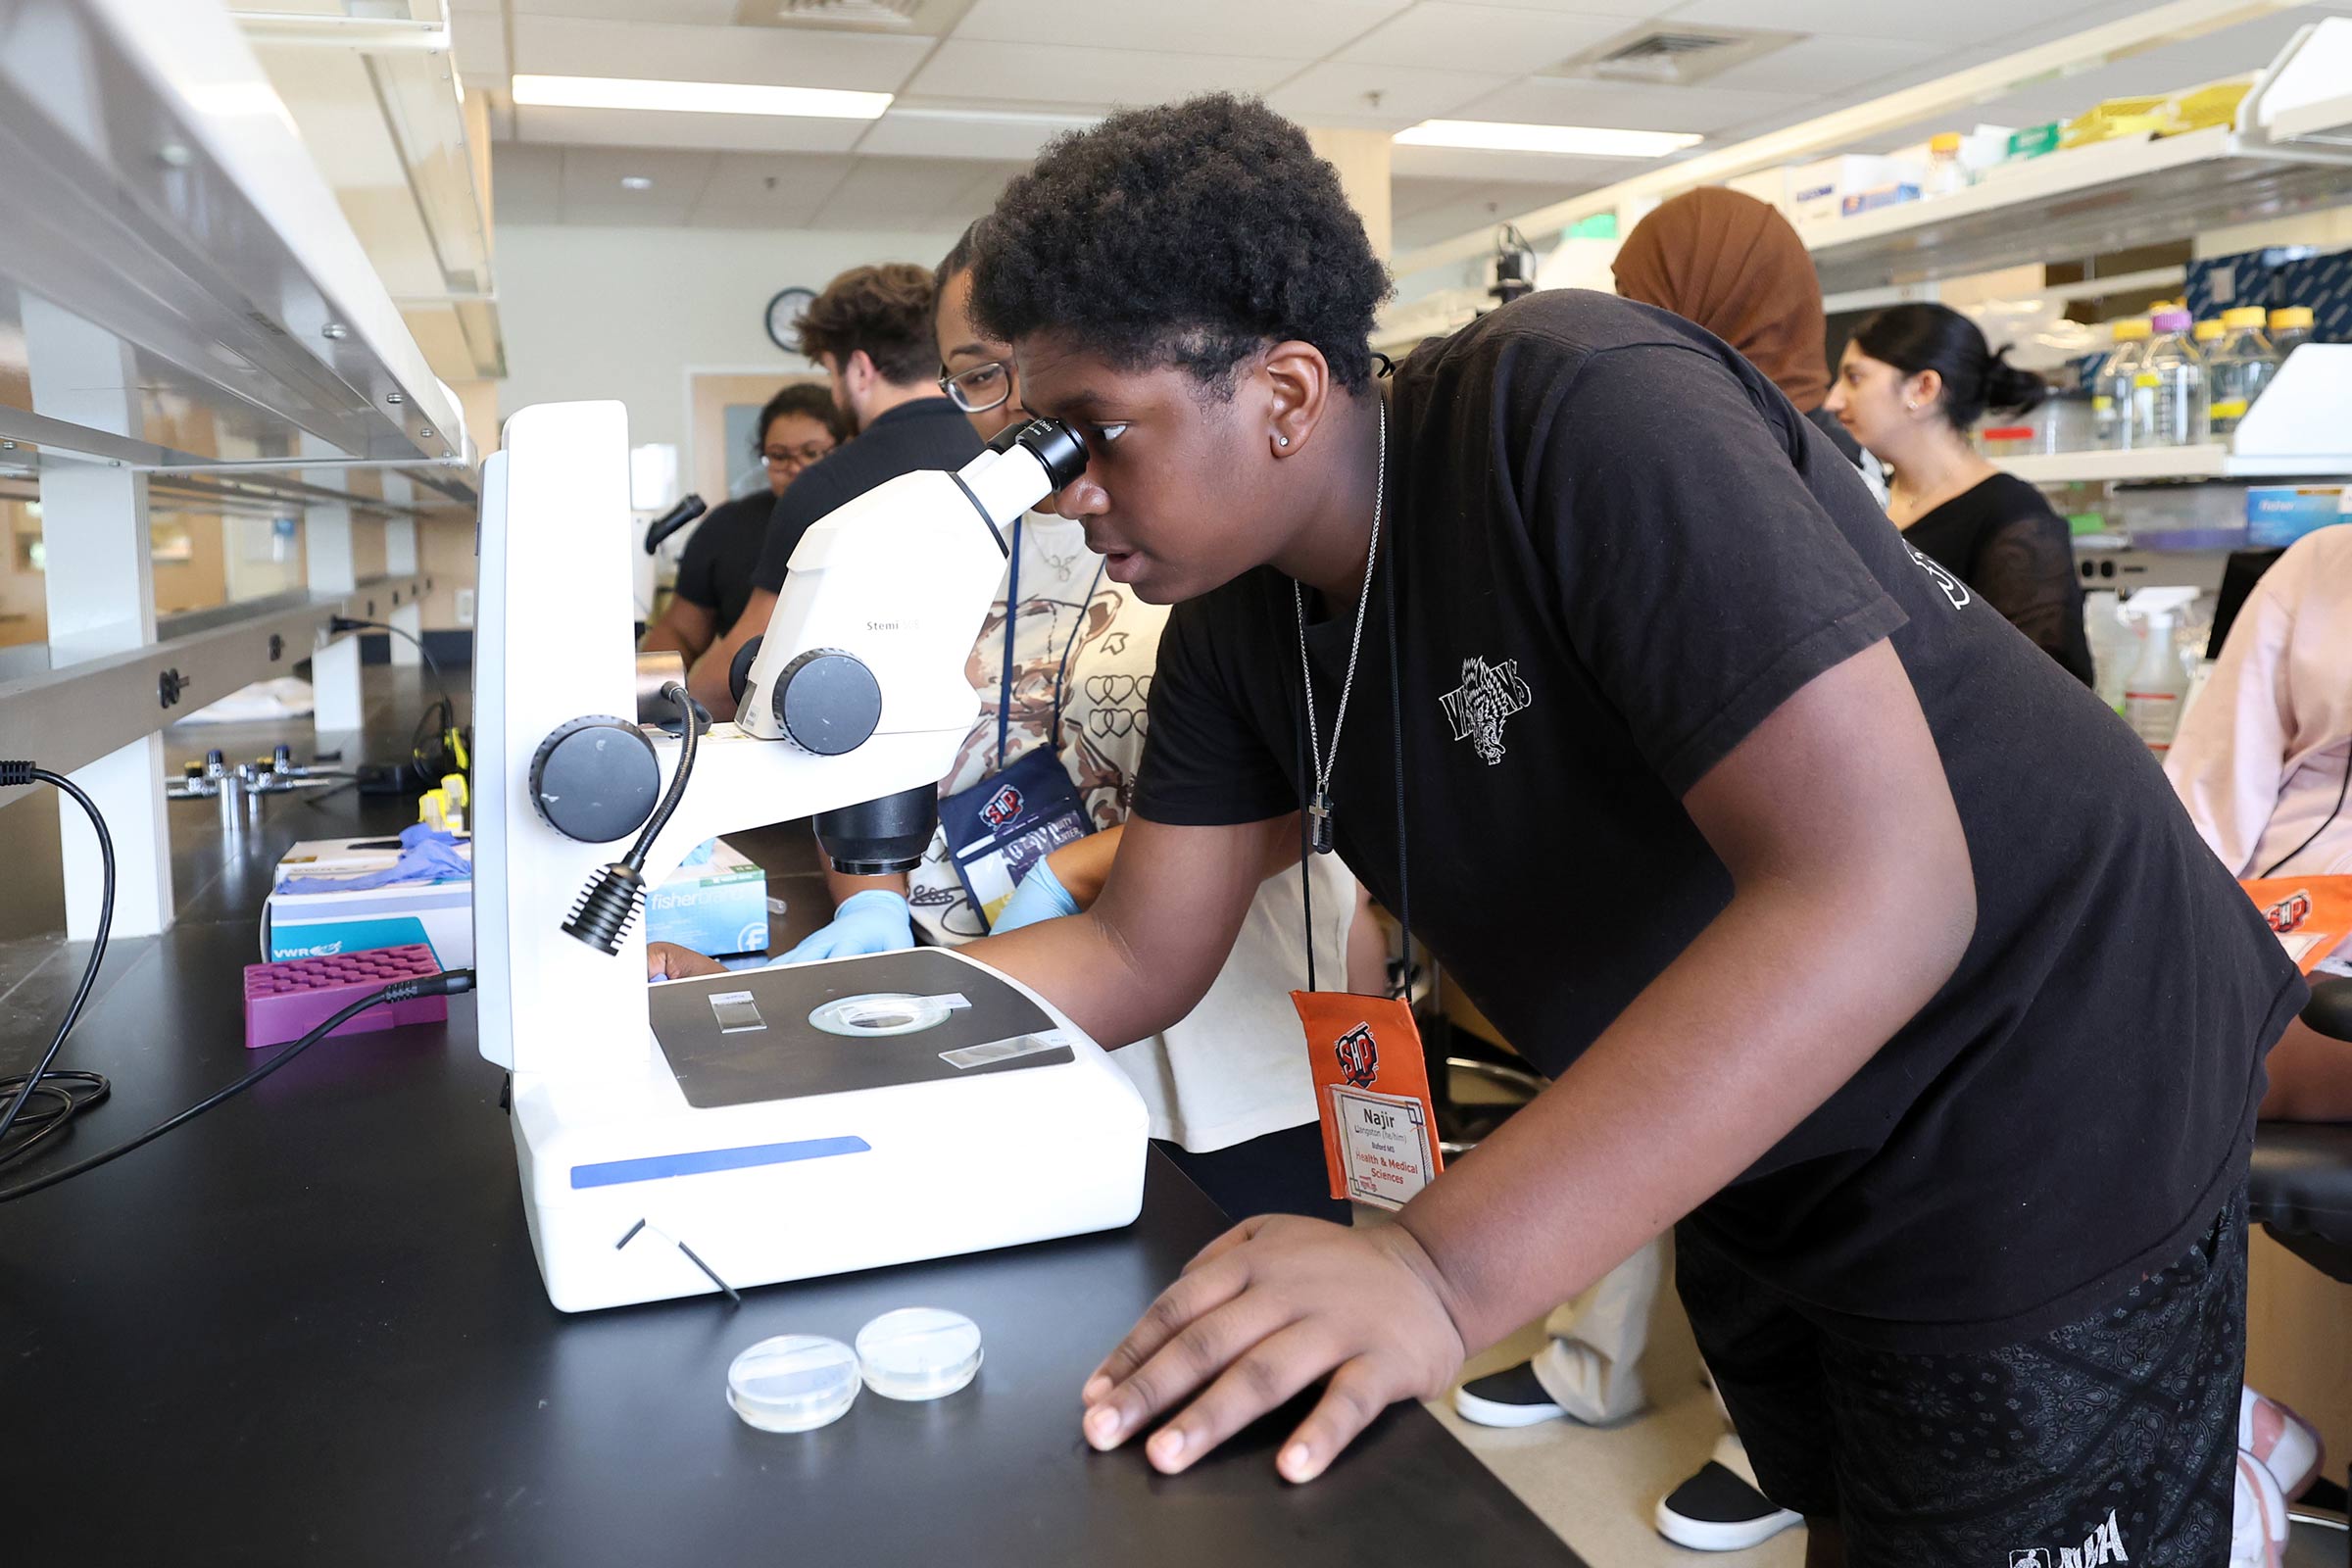 Students looking into a microscope